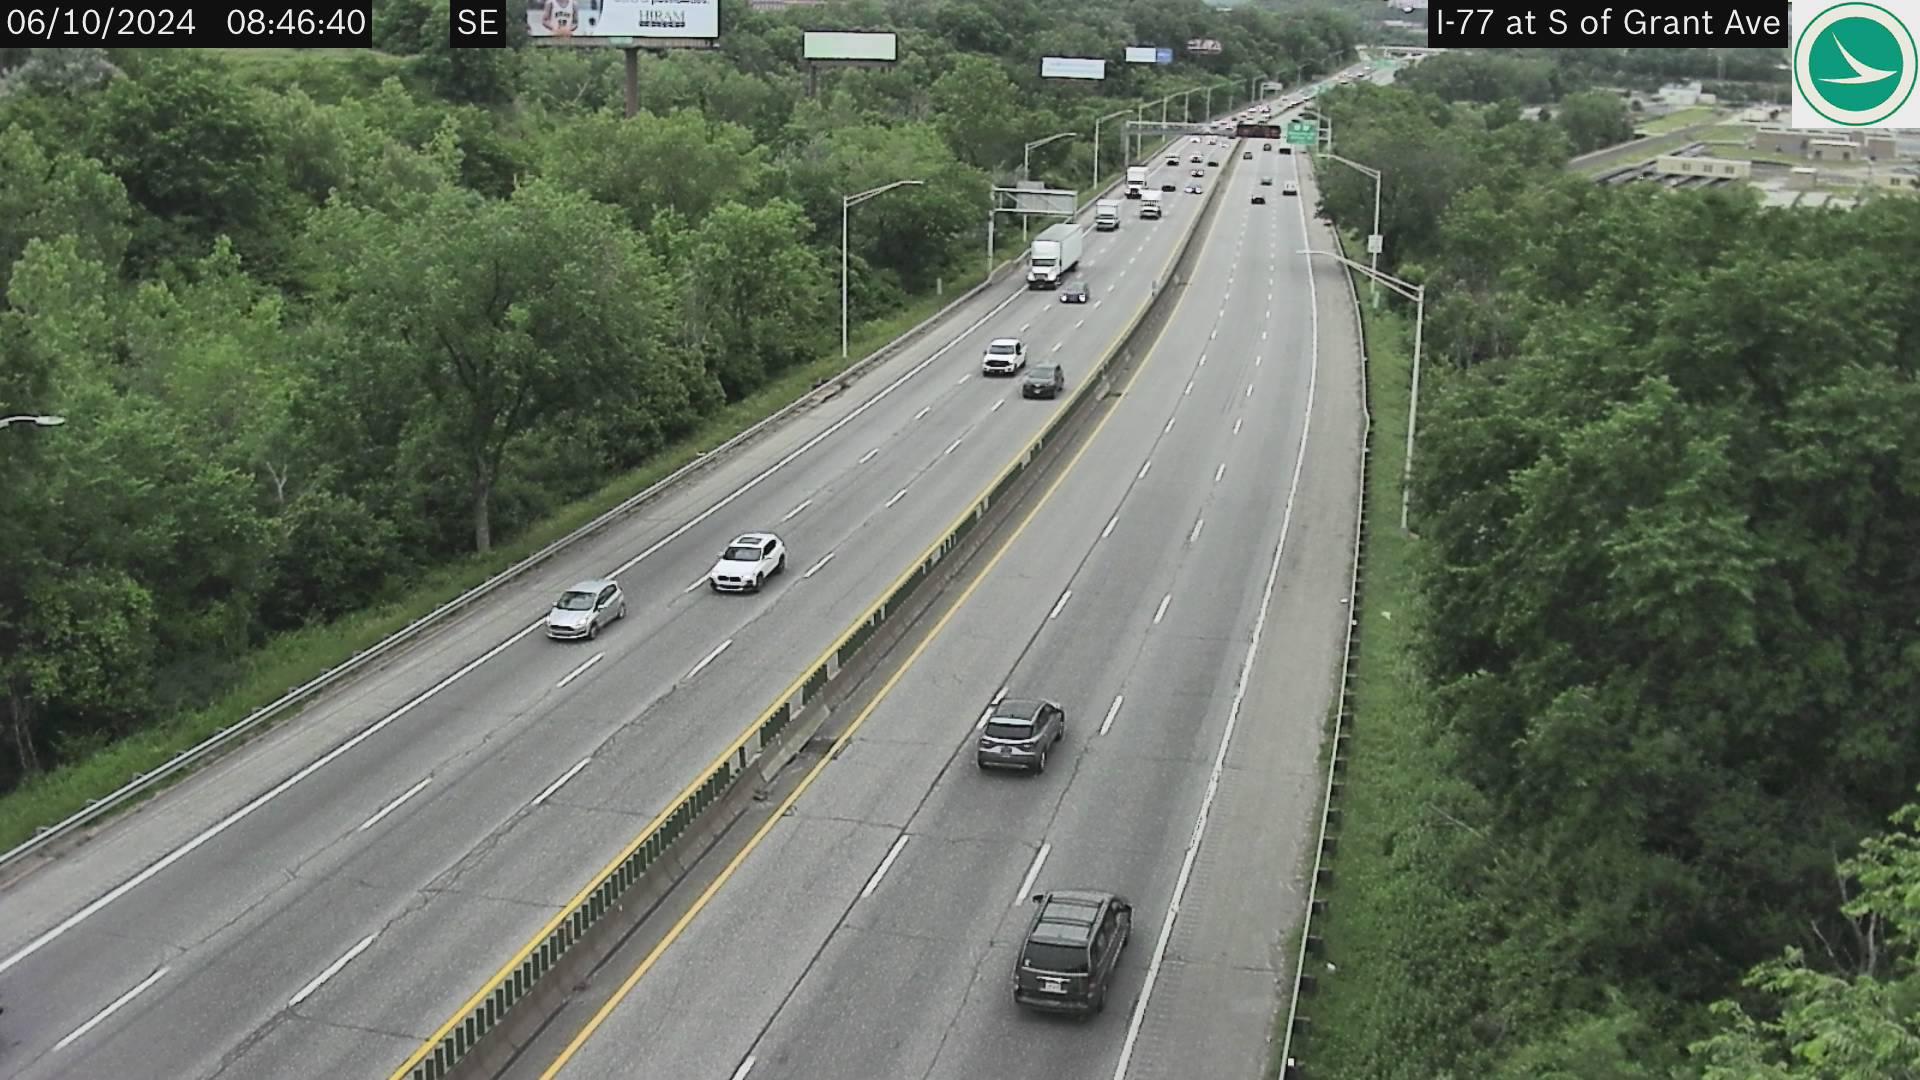 Traffic Cam Cuyahoga Heights: I-77 at S of Grant Ave